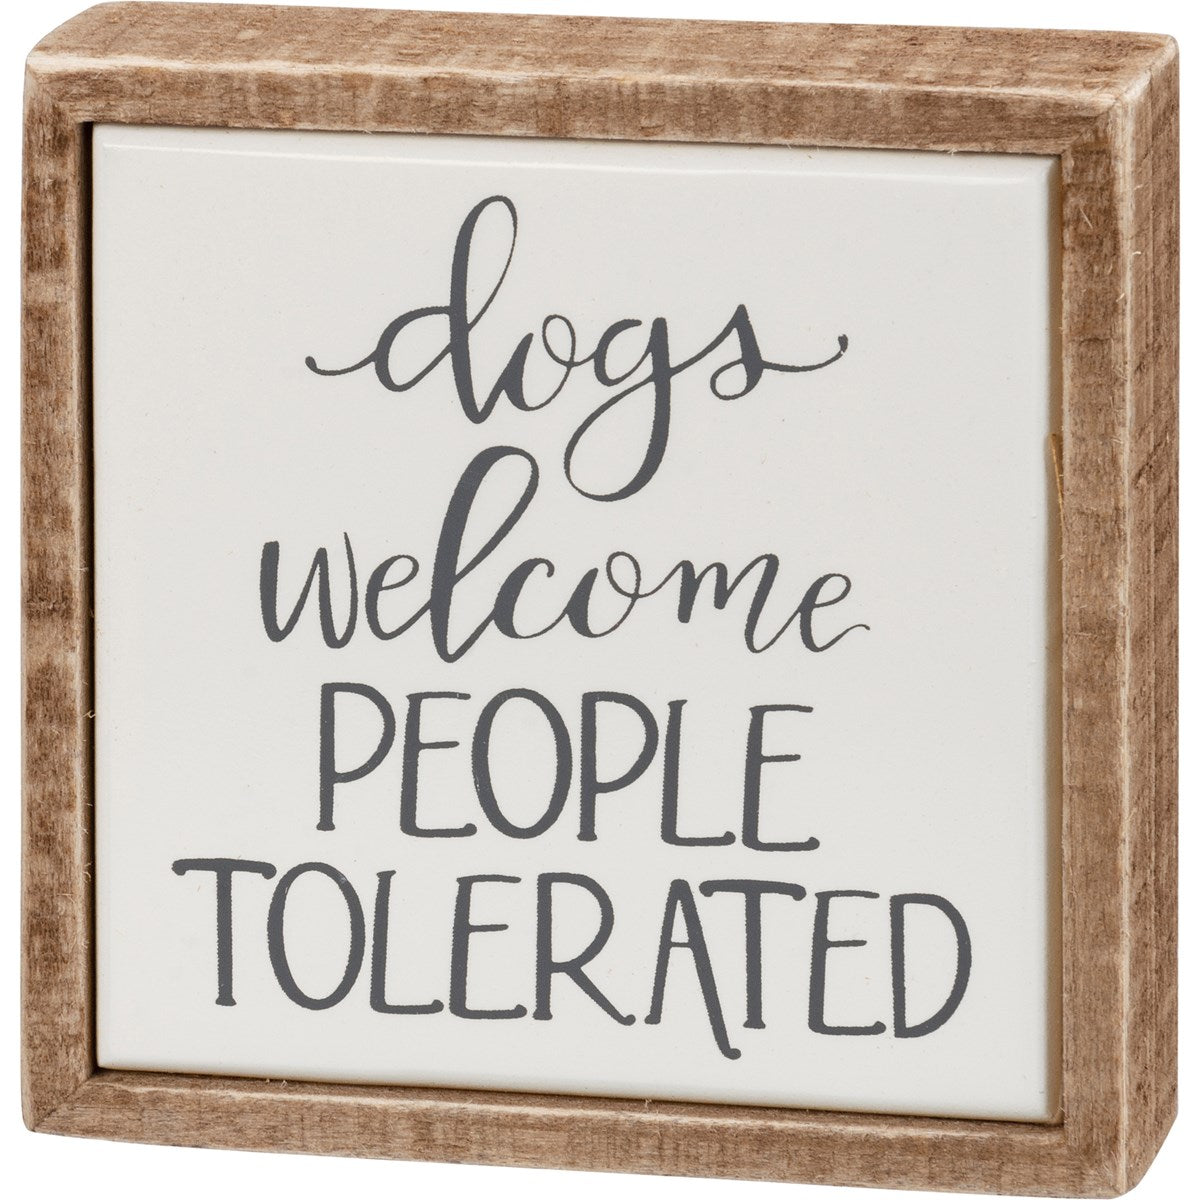 Dogs Welcome People Tolerated Wooden Sign